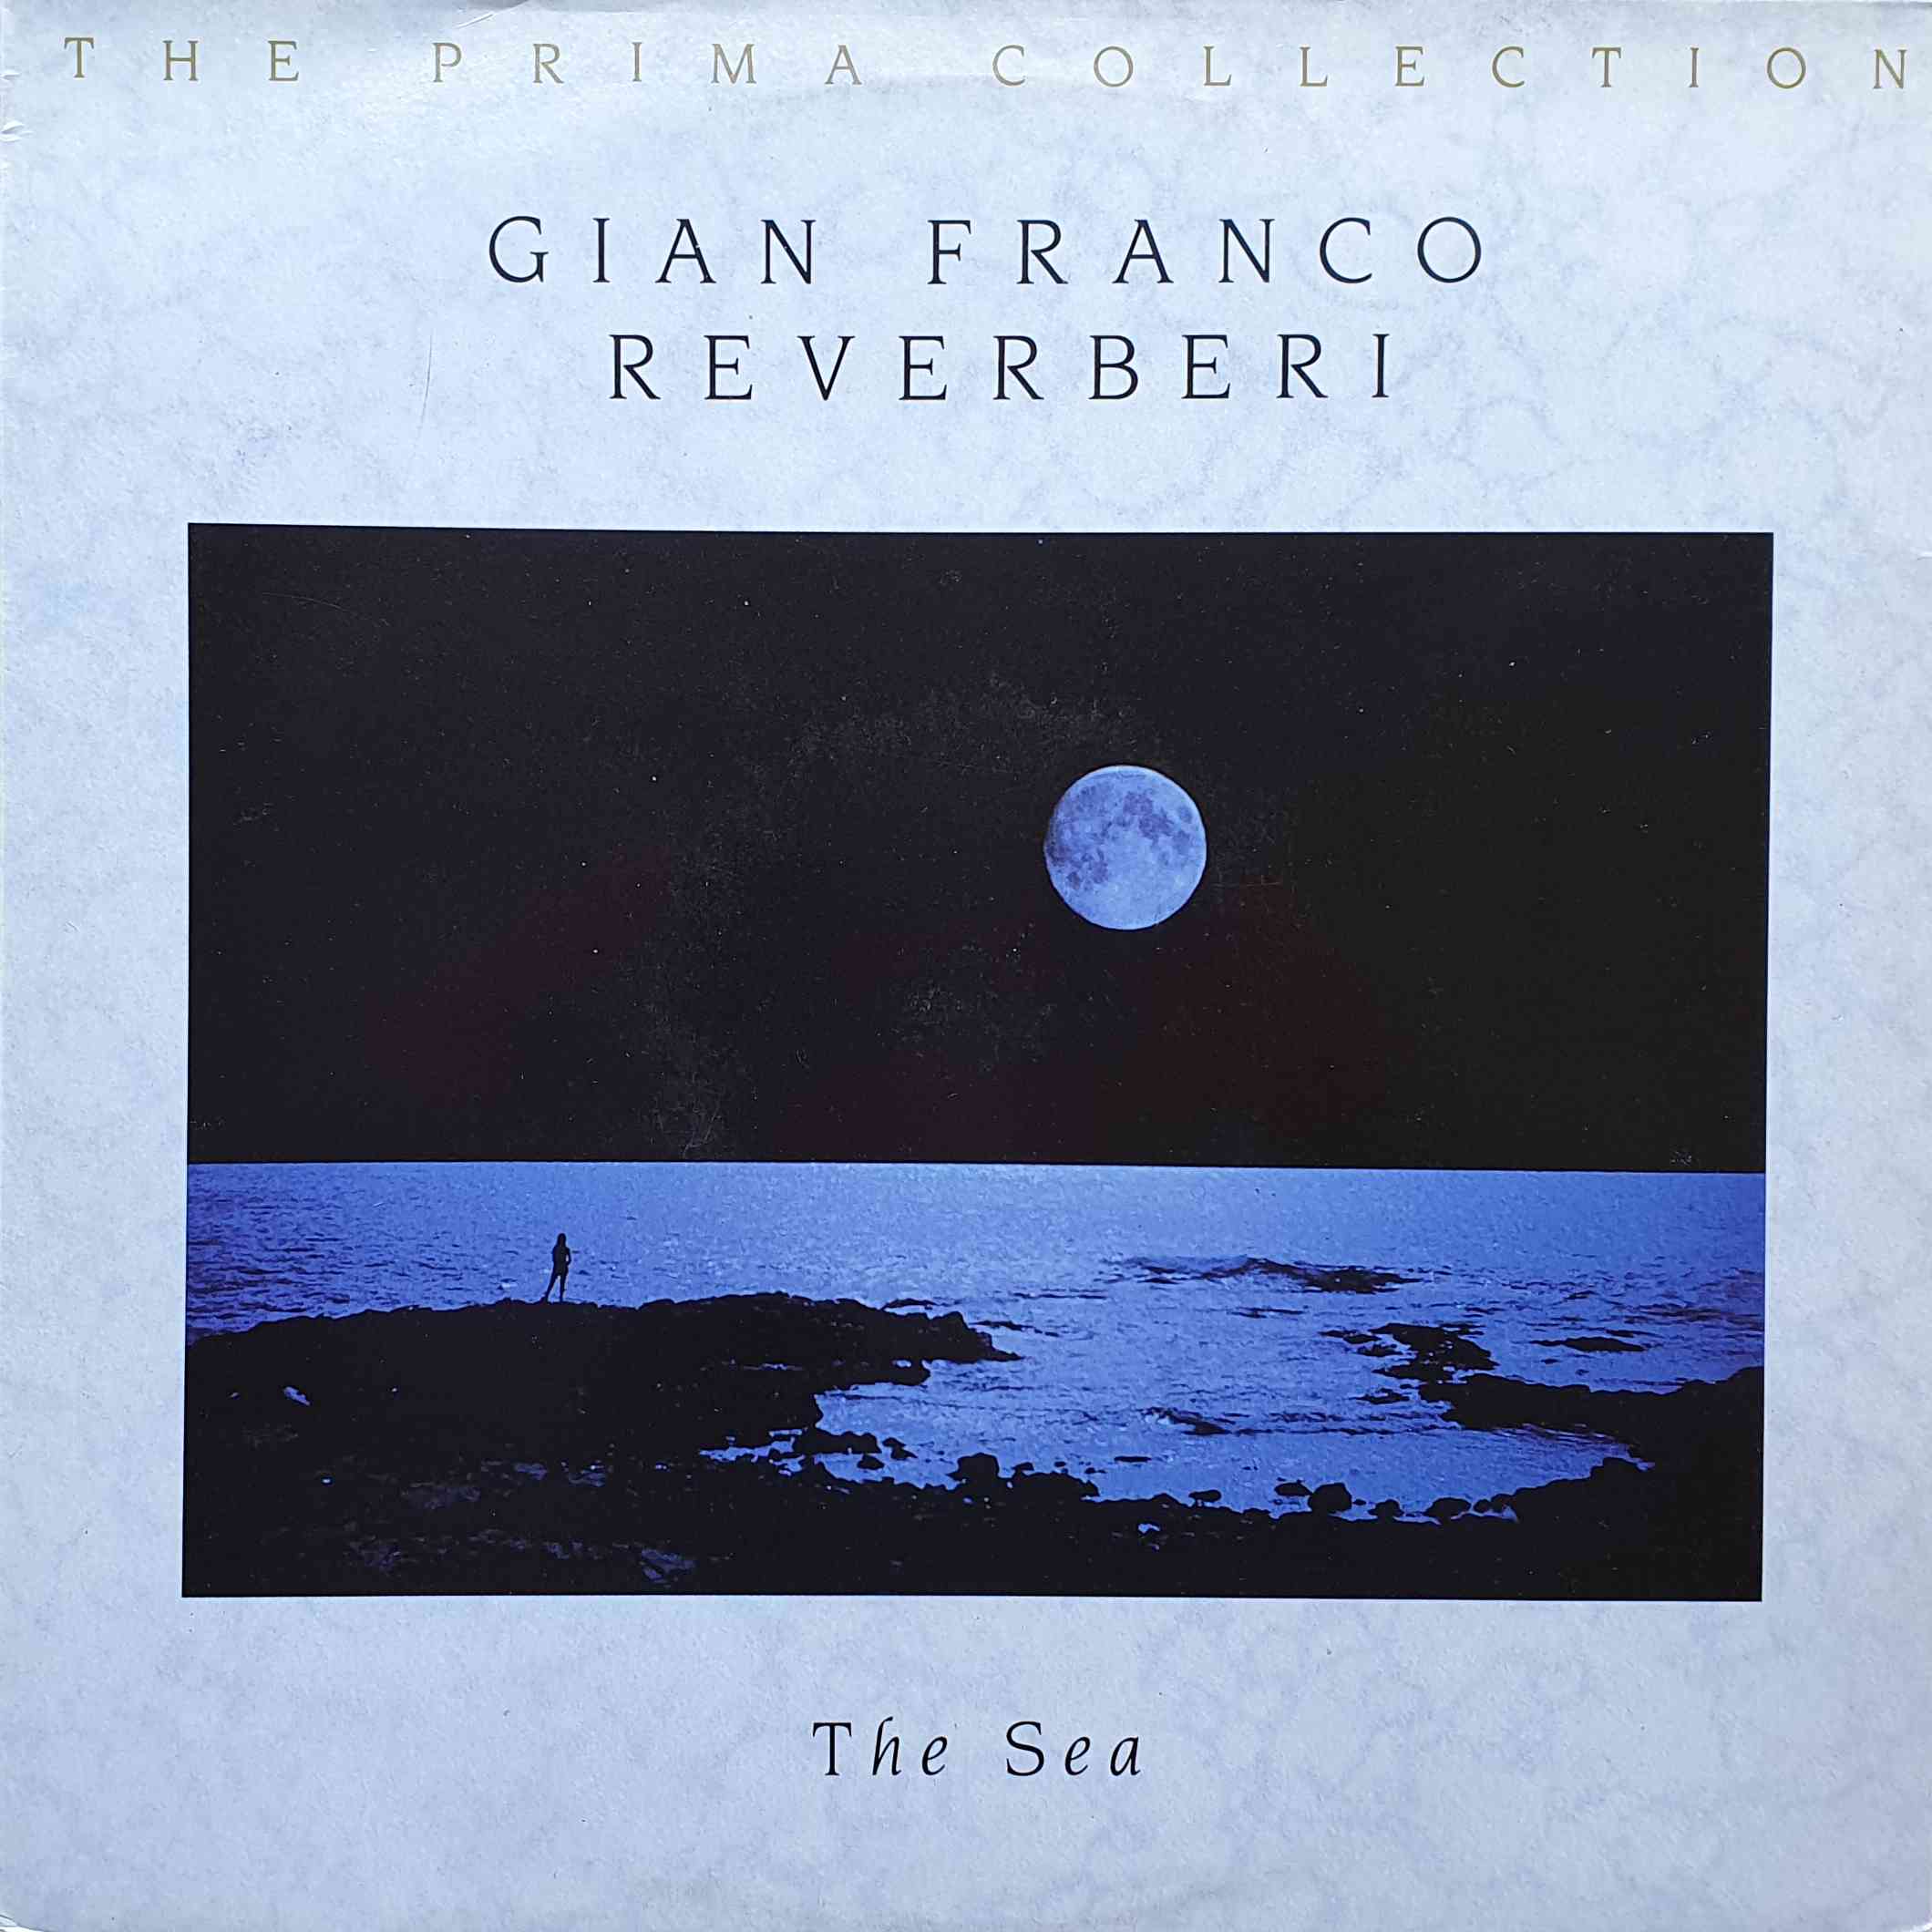 Picture of The sea by artist Gian Franco Reverberi from the BBC albums - Records and Tapes library